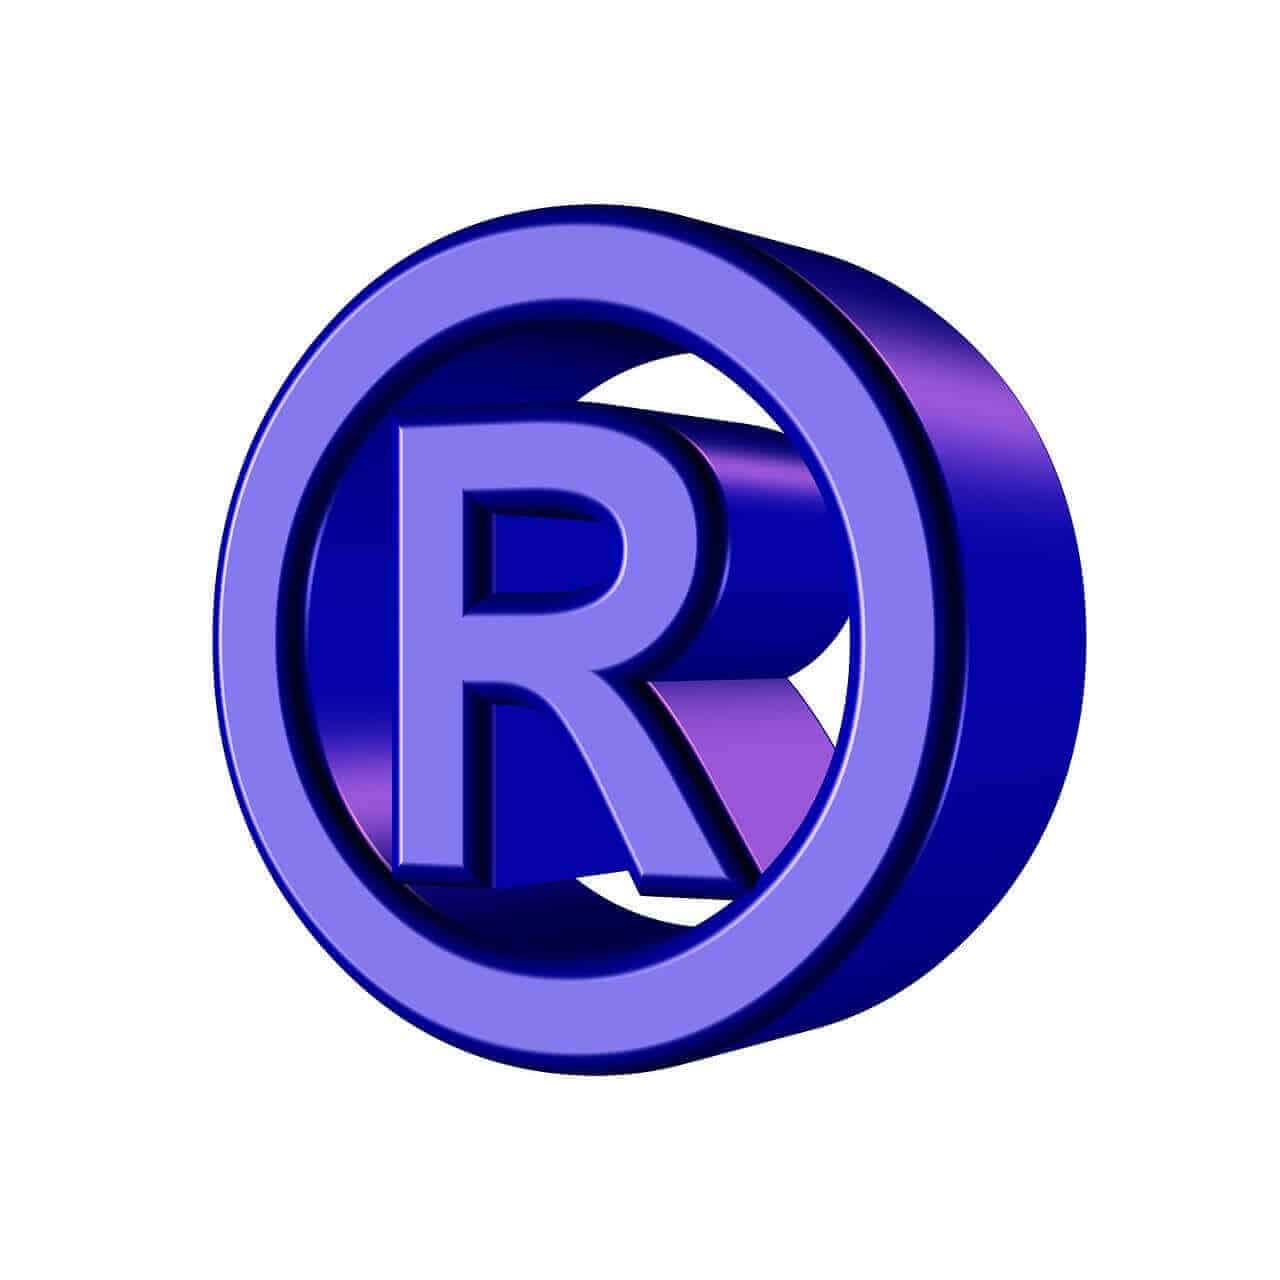 Why Should You Register Your Trademark?